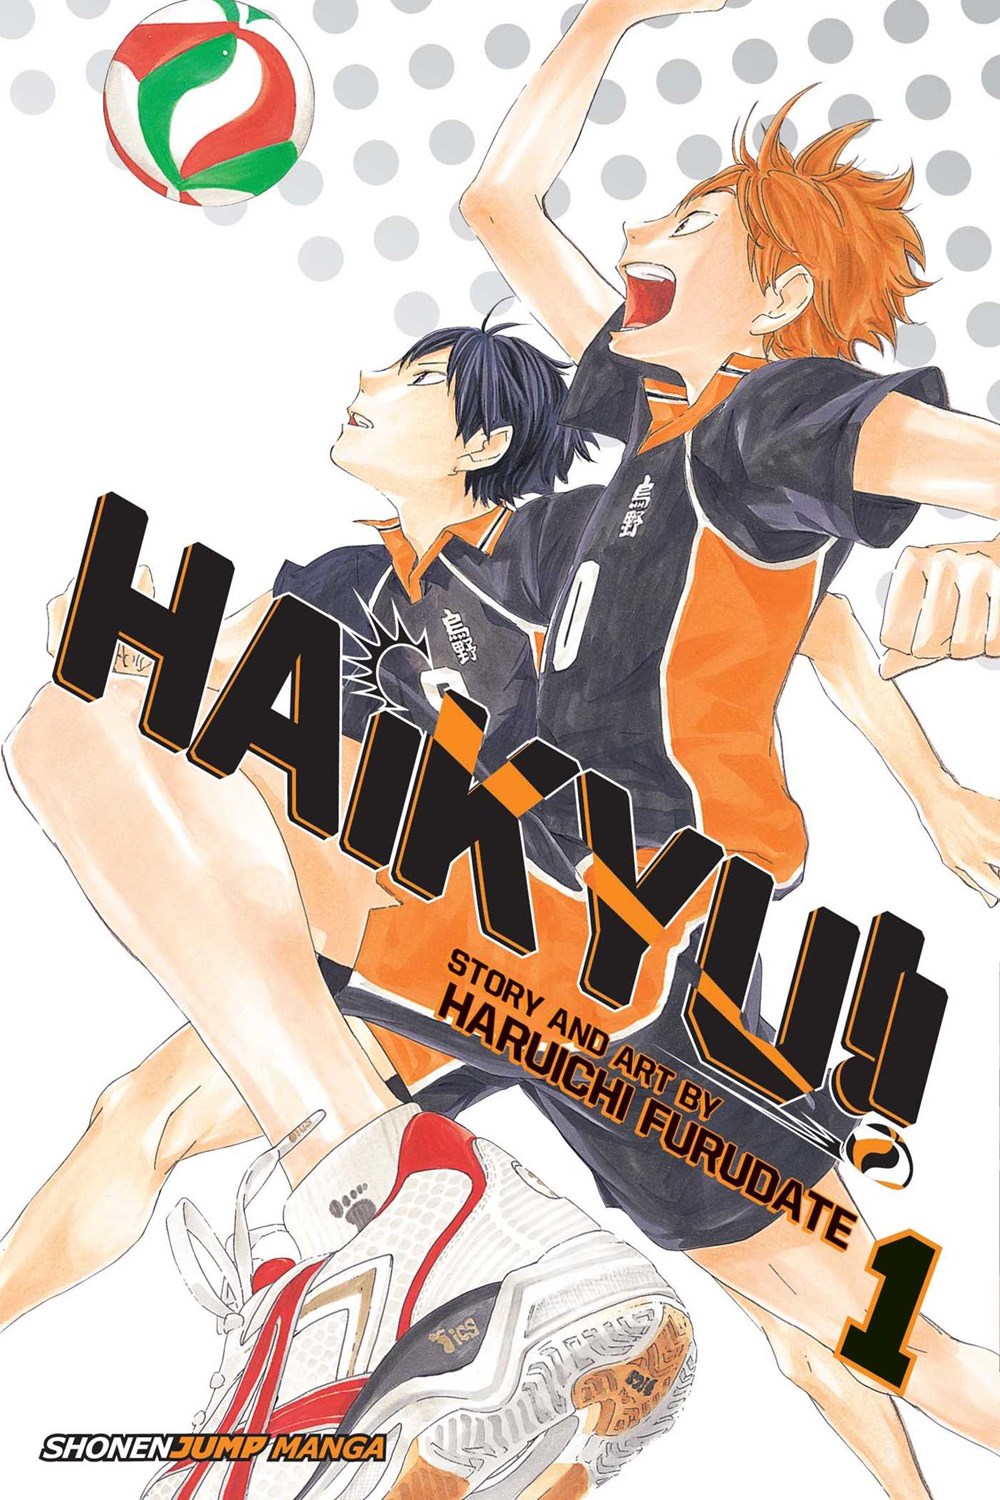 HAIKYU!! TO THE TOP — WEEKLY REVIEW 8 – IT'S YOUR FAULT THAT I'M NOT  POPULAR!